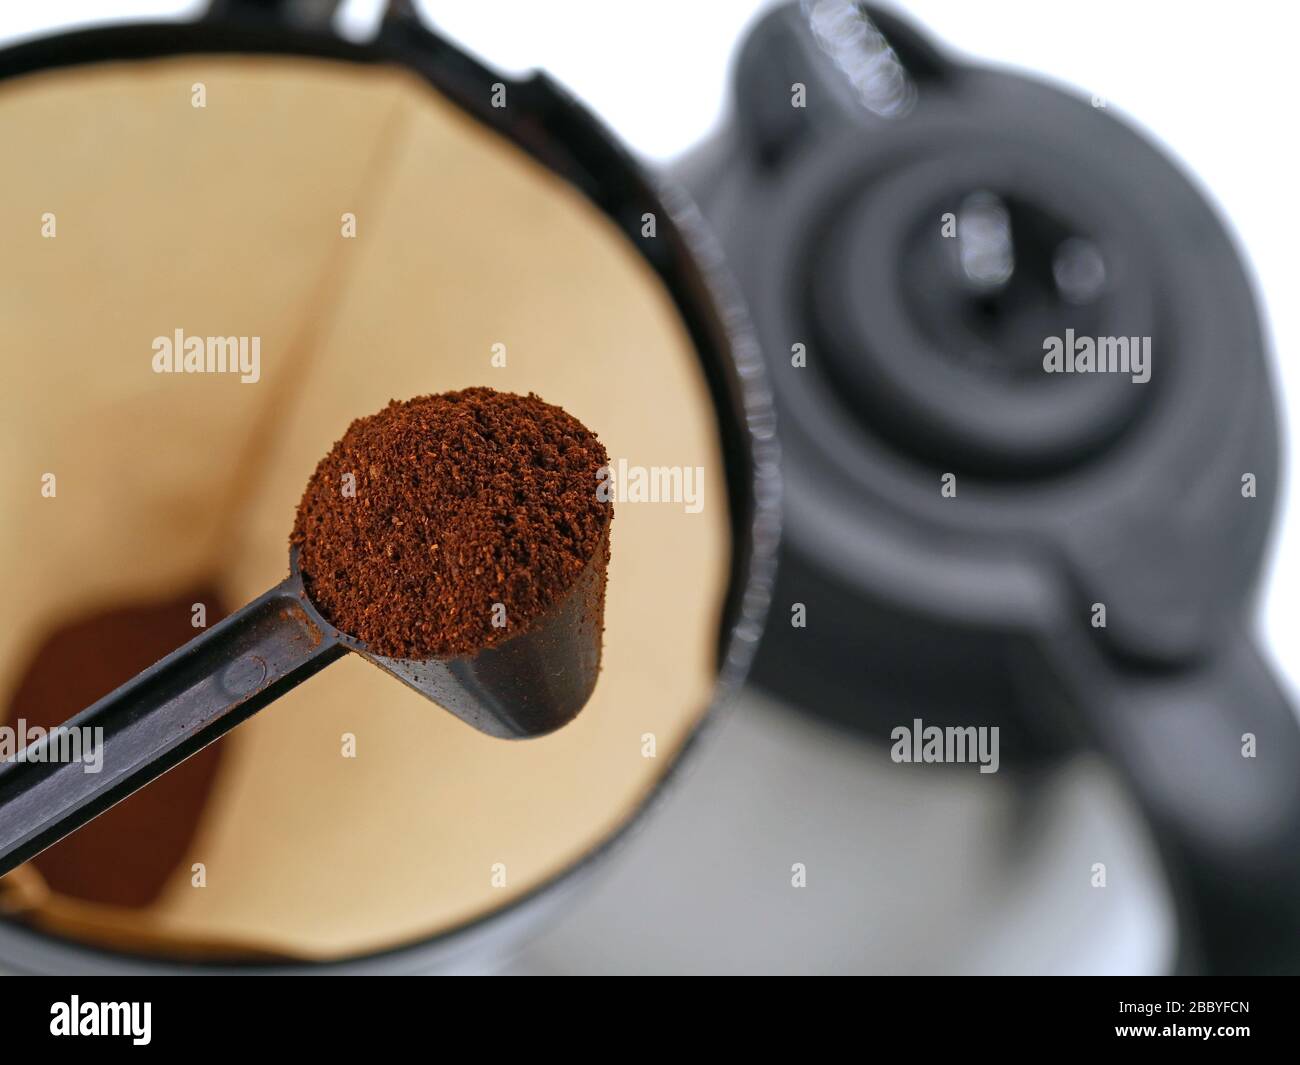 spoon with coffee powder in front of coffee strainer with coffee pot on background. concept of making coffee Stock Photo